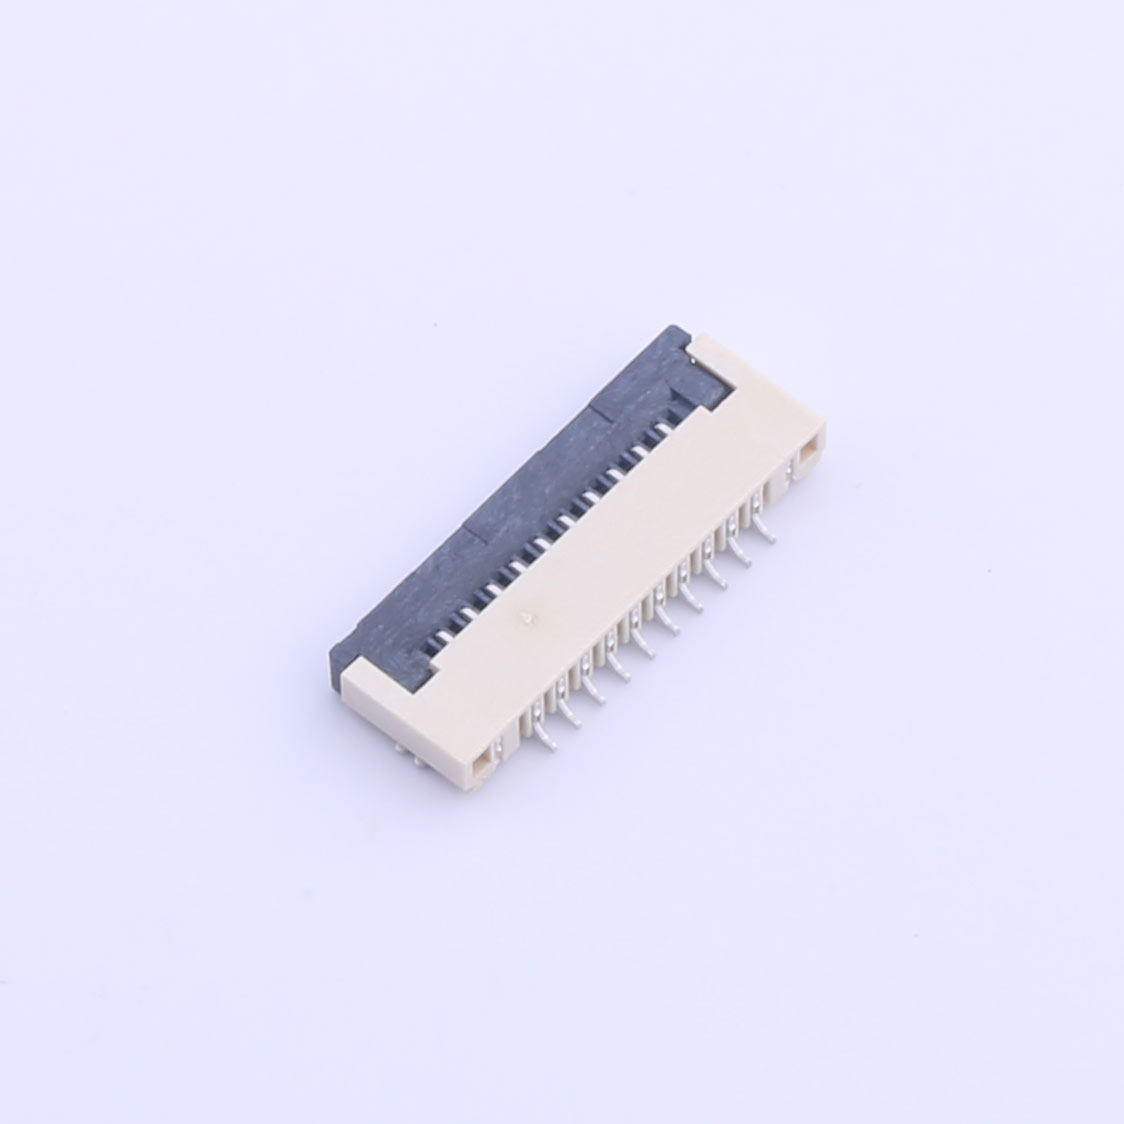 Kinghelm 1mm Pitch FPC FFC Connector 10P Height 2mm Front Flip Bottom Contact SMT FPC Connector--KH-FG1.0-H2.0-10PIN